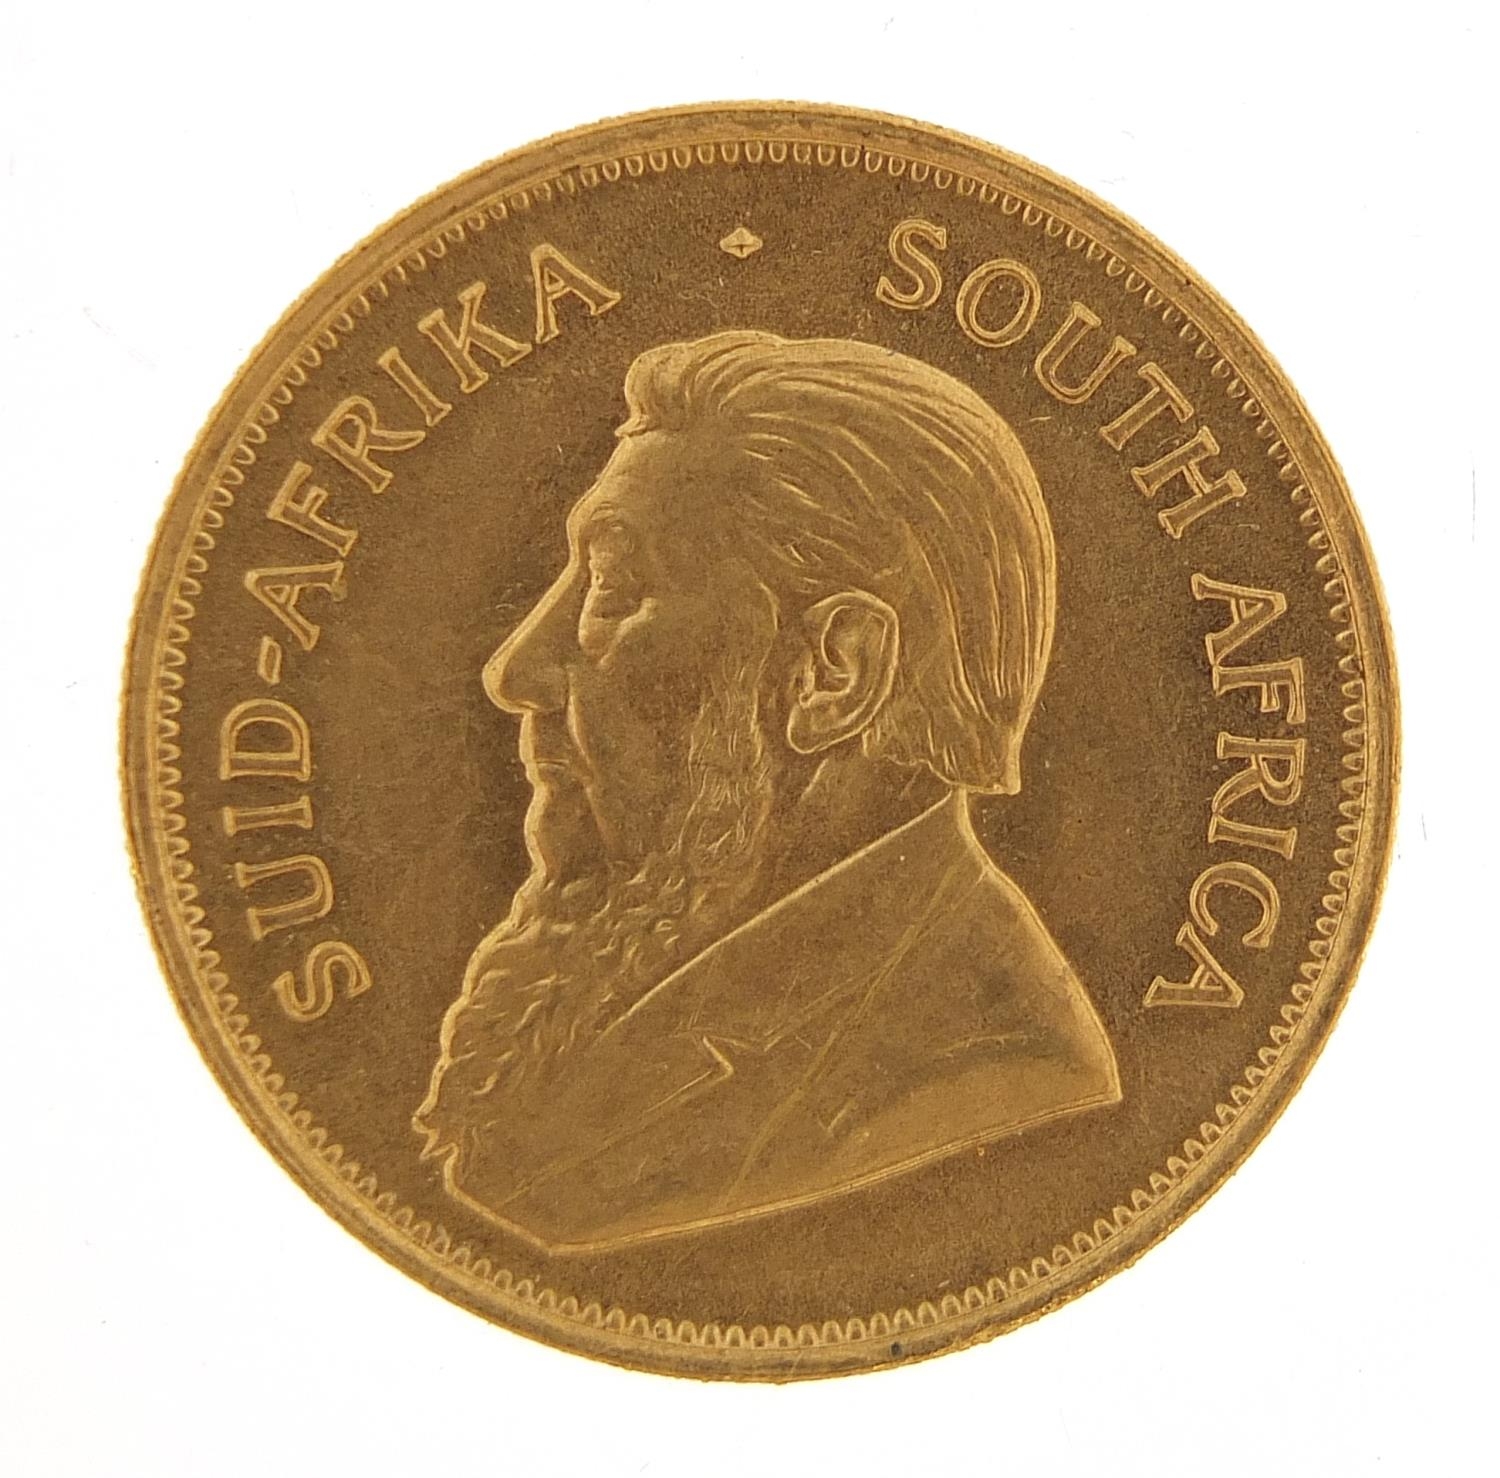 South African 1974 gold krugerrand - this lot is sold without buyer?s premium, the hammer price is - Image 2 of 3